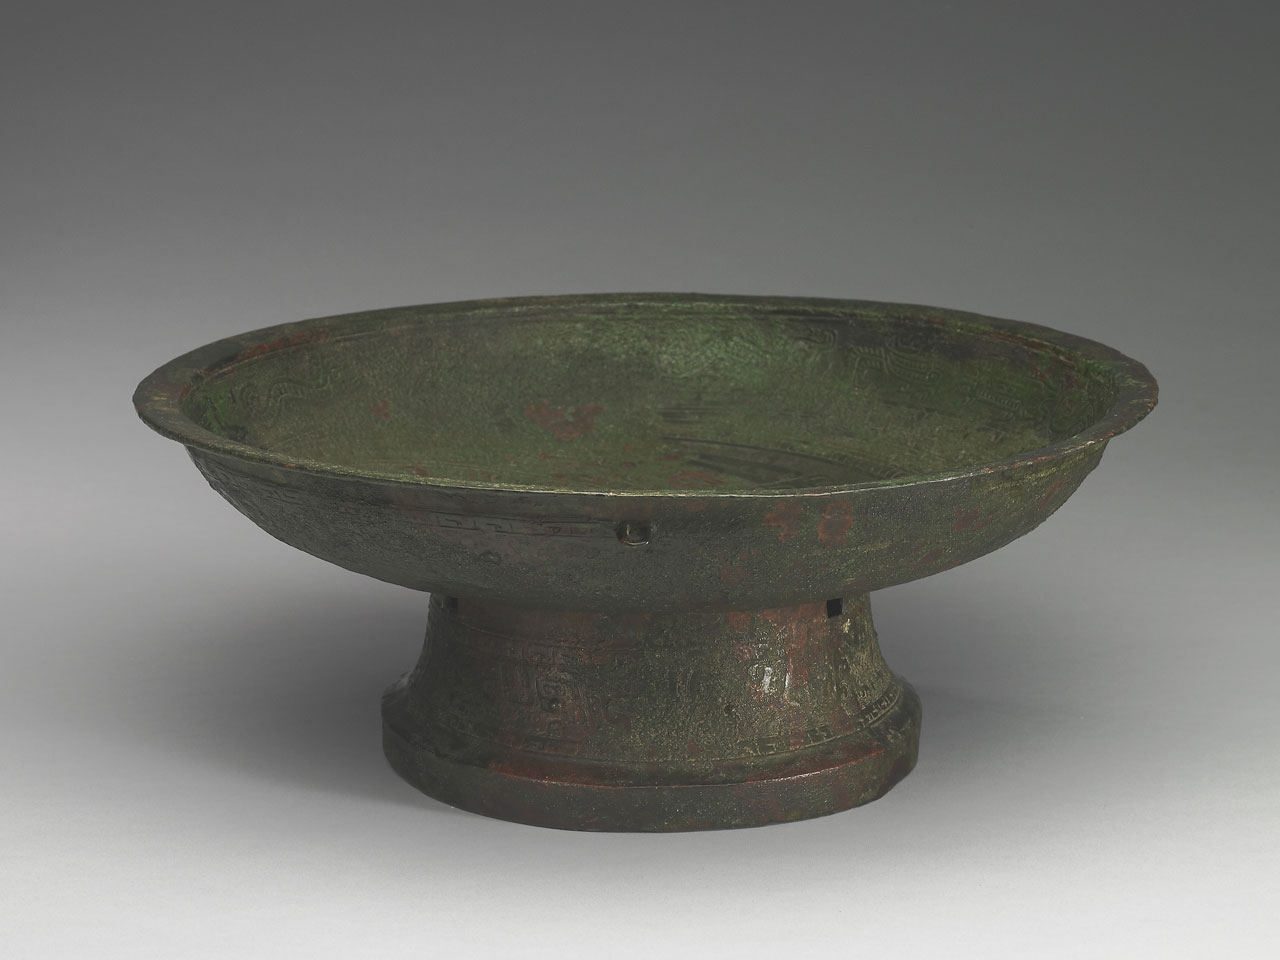 Pan water vessel with coiling dragon pattern, Late Shang Dynasty